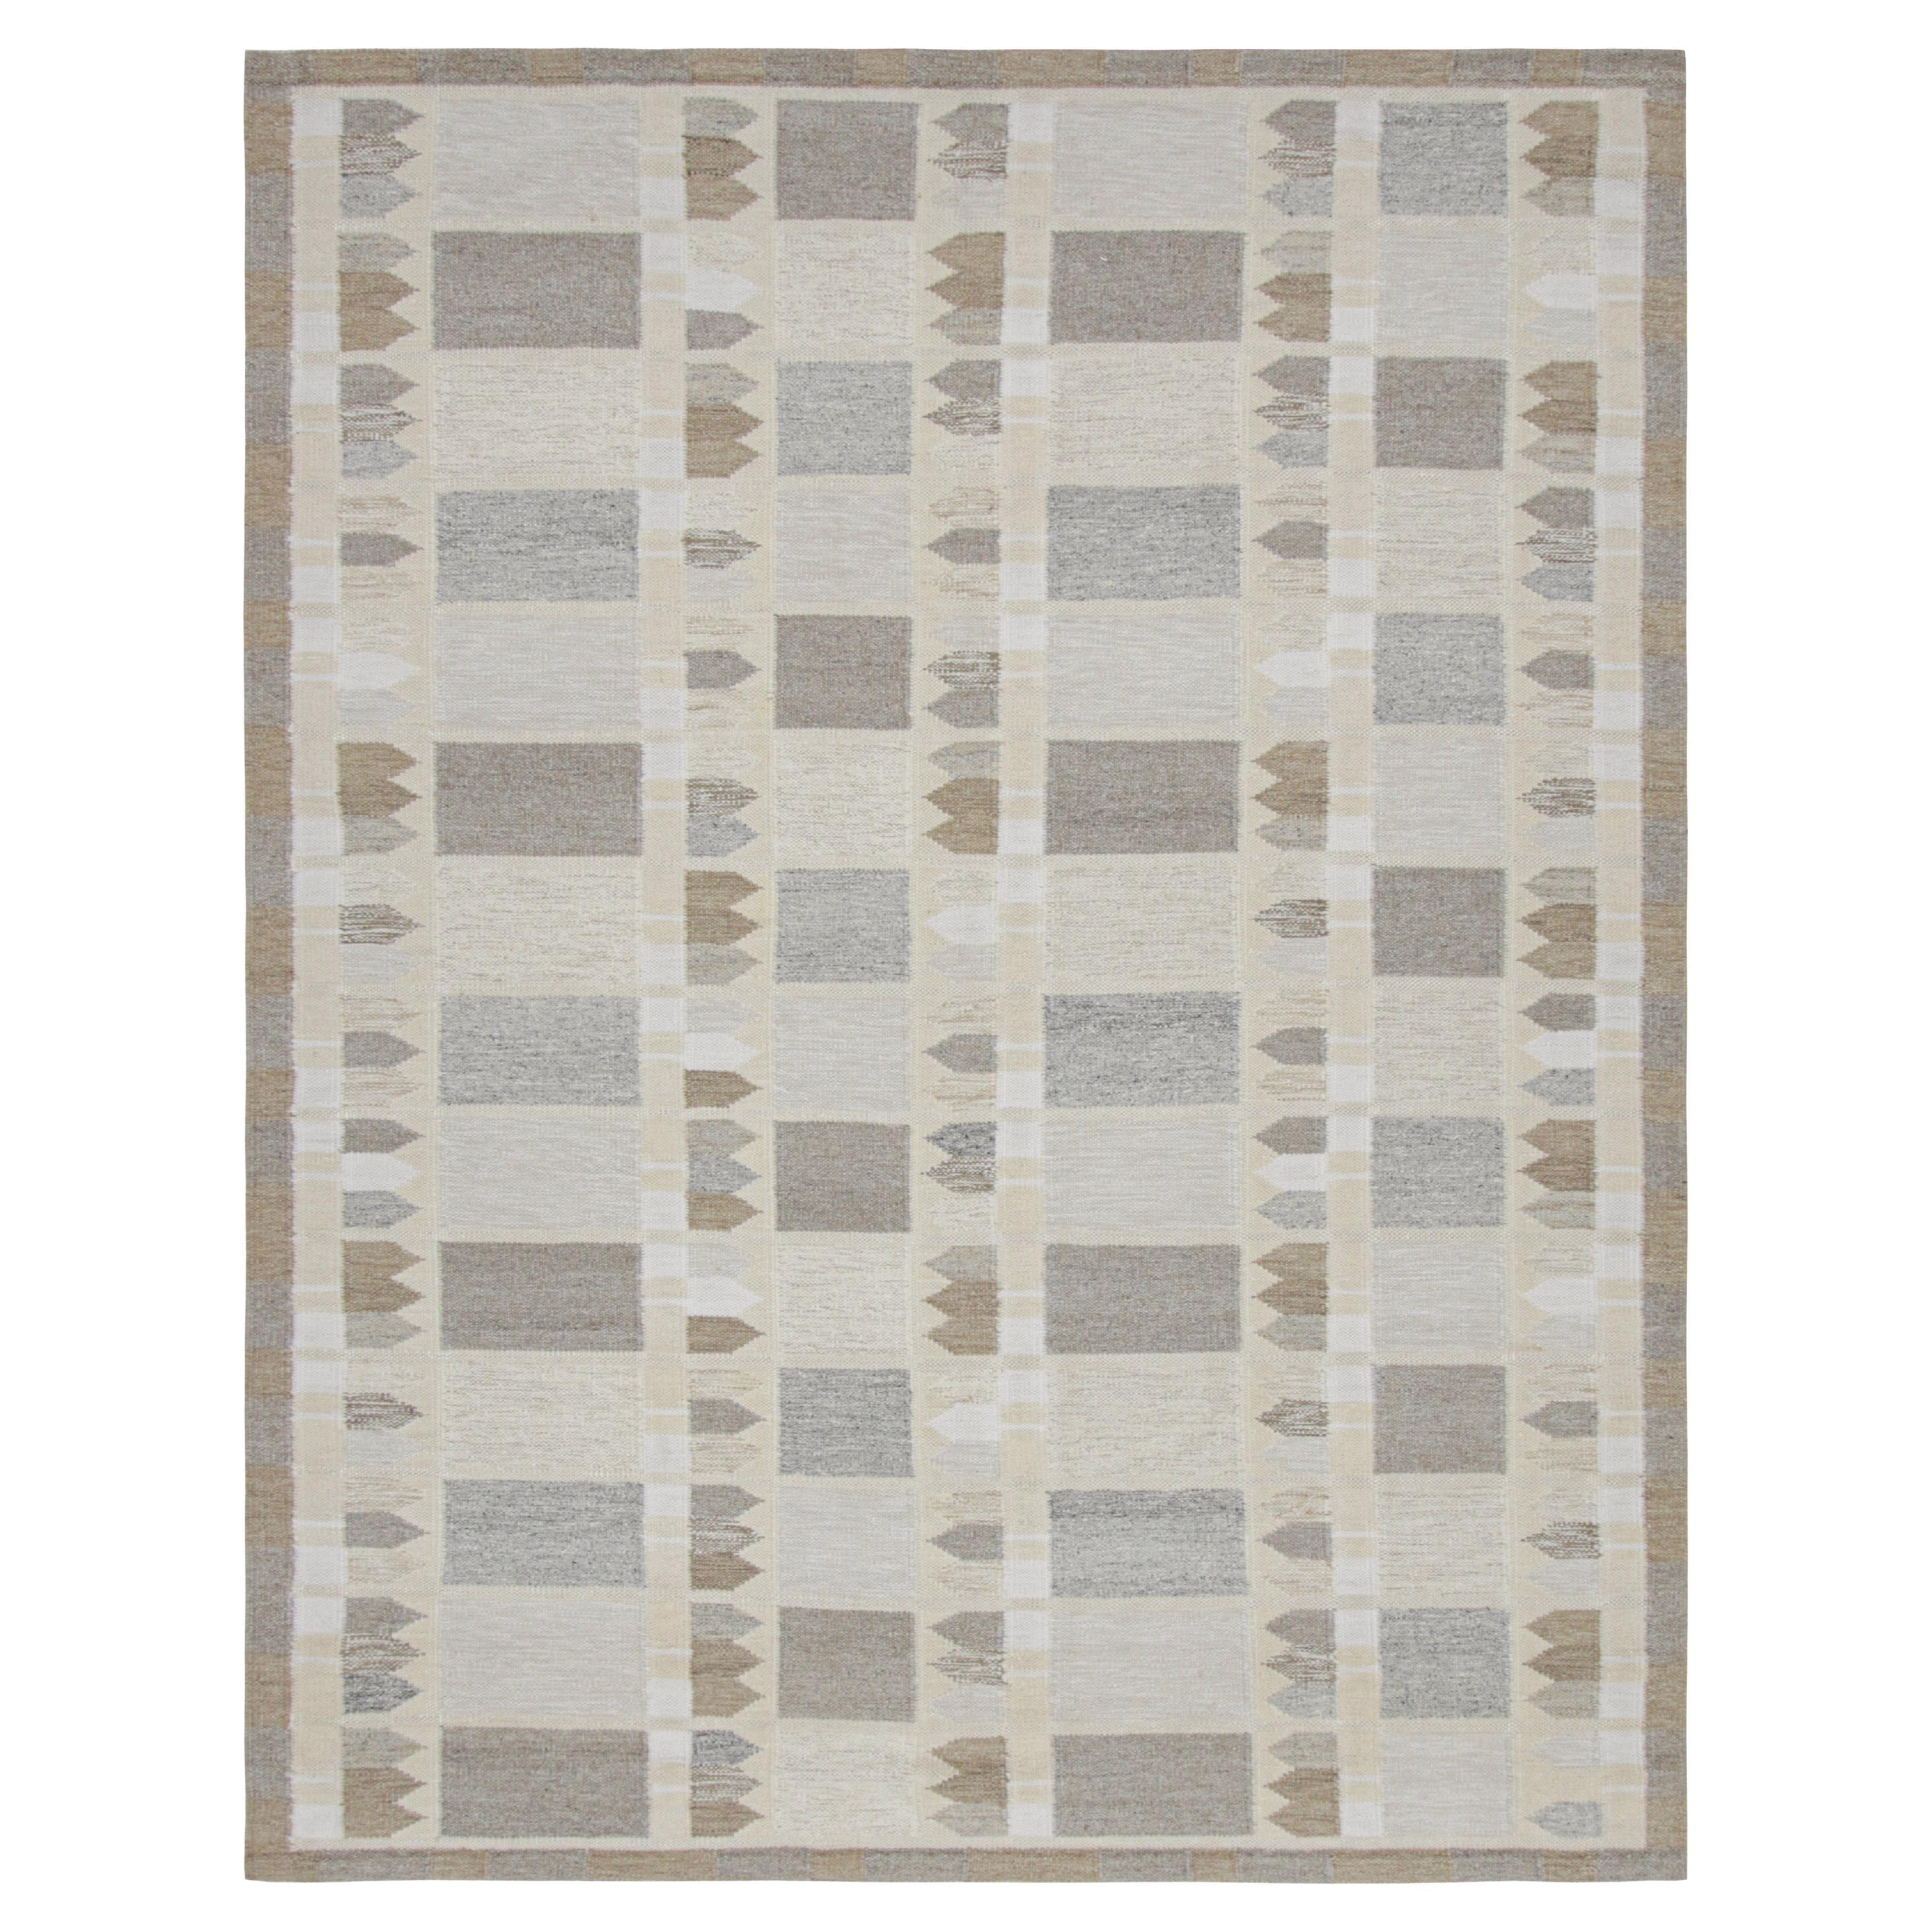 Rug & Kilim’s Scandinavian Style Deco Rug in Beige-Brown with Geometric Patterns For Sale